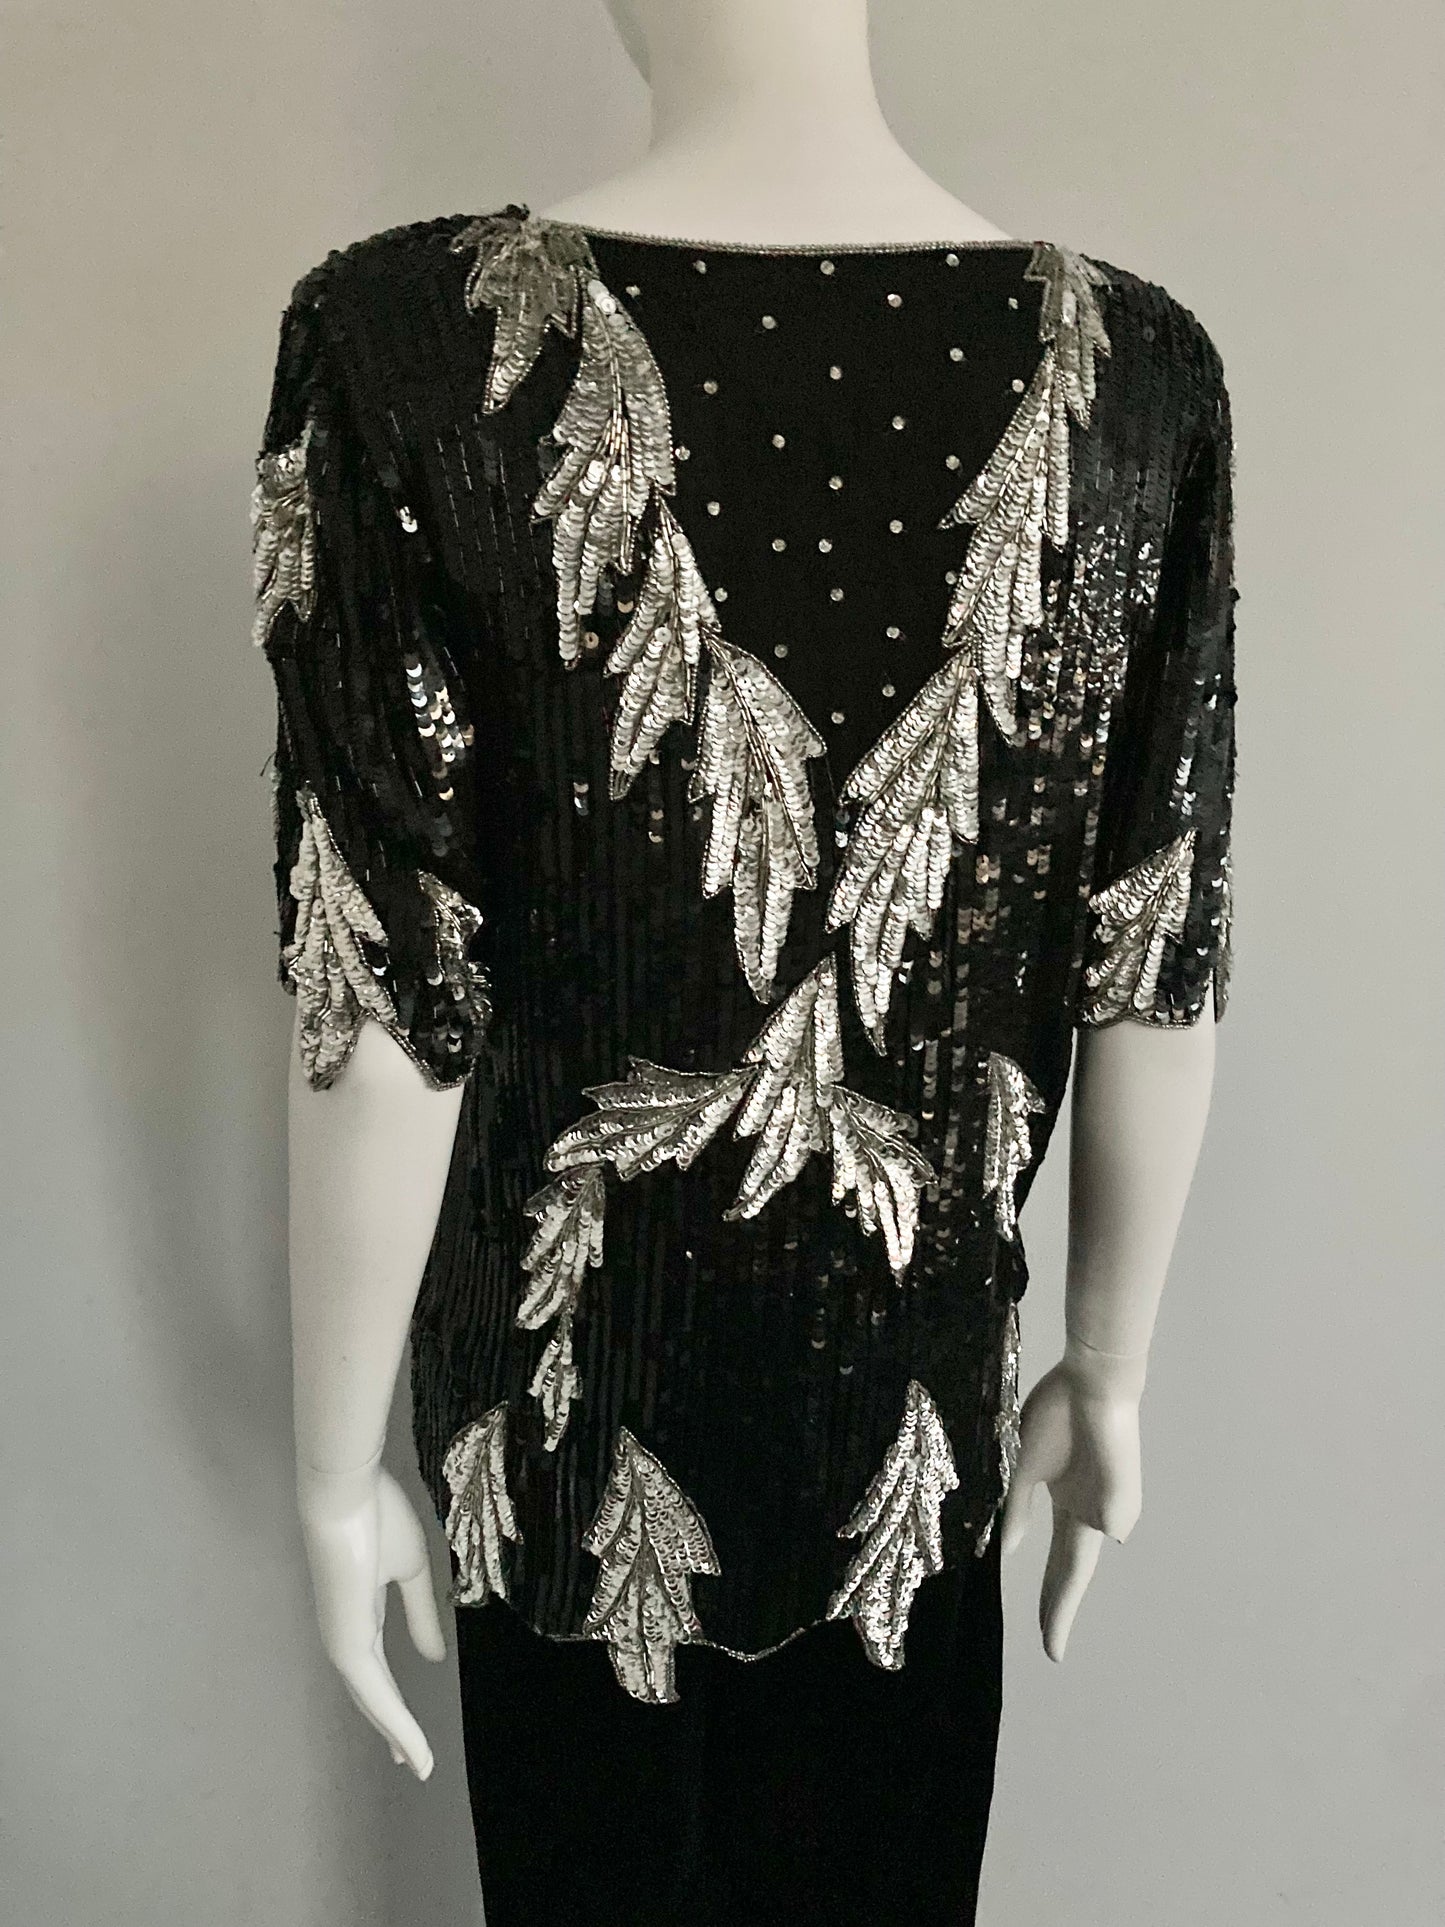 1980s Black and Silver Sequinned Party Top, Disco, Size S/M